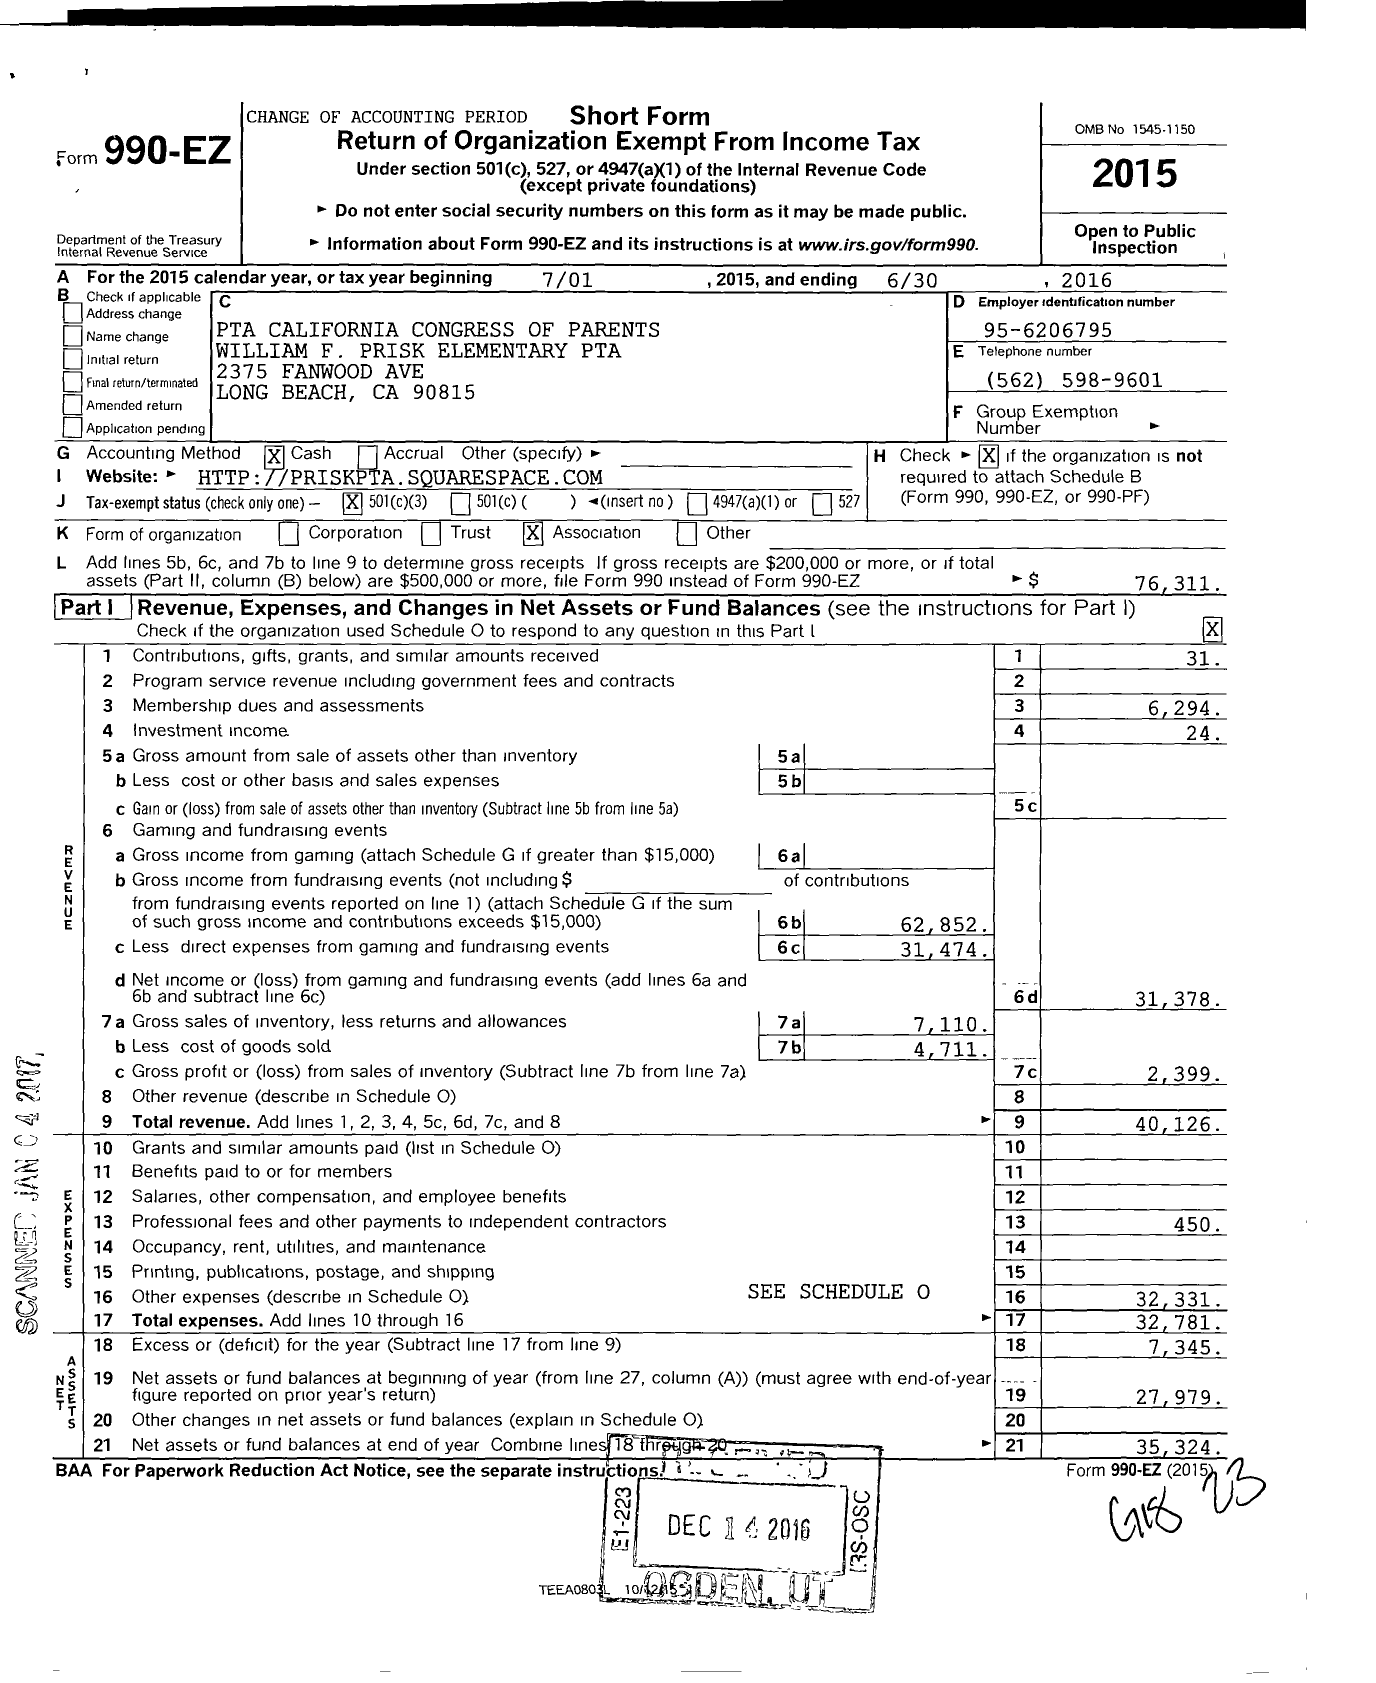 Image of first page of 2015 Form 990EZ for California State PTA - William F Prisk Elementary PTA